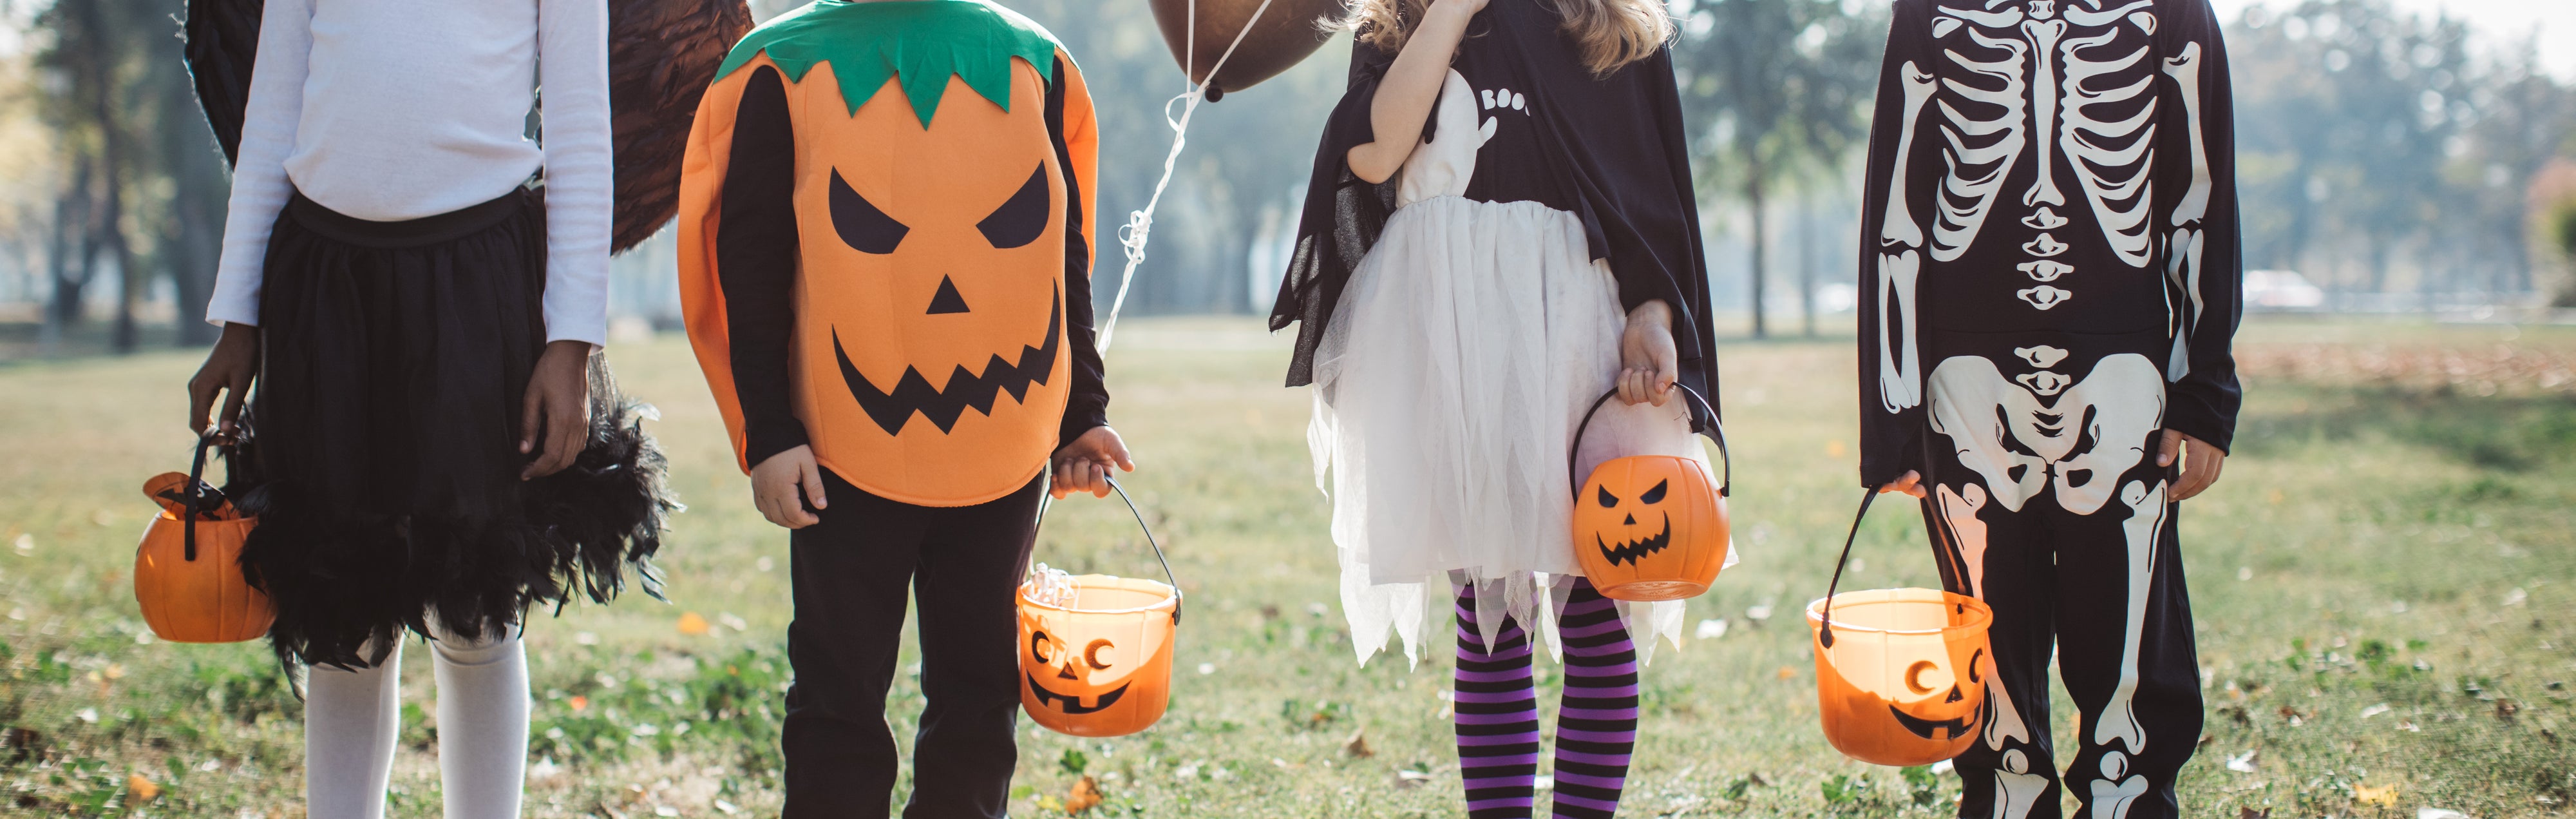 children go for trick or treat